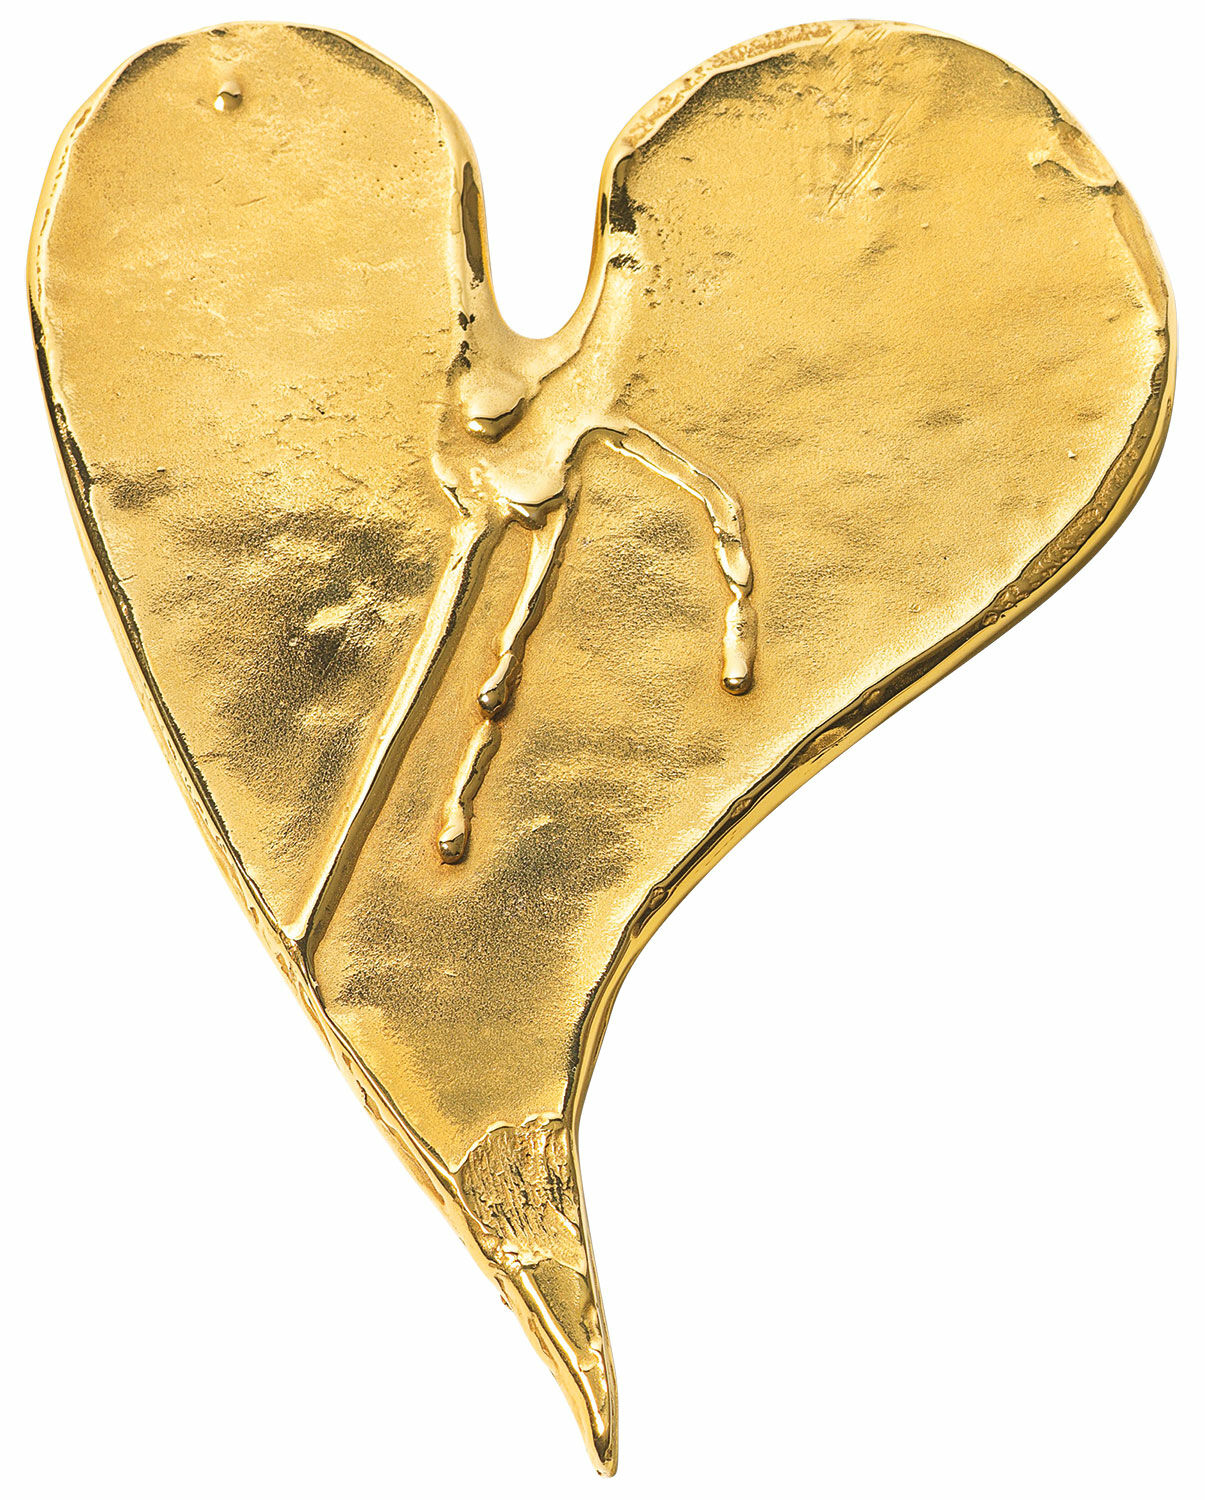 Bronze object "Heart with Tears", gold-plated by Bruno Bruni